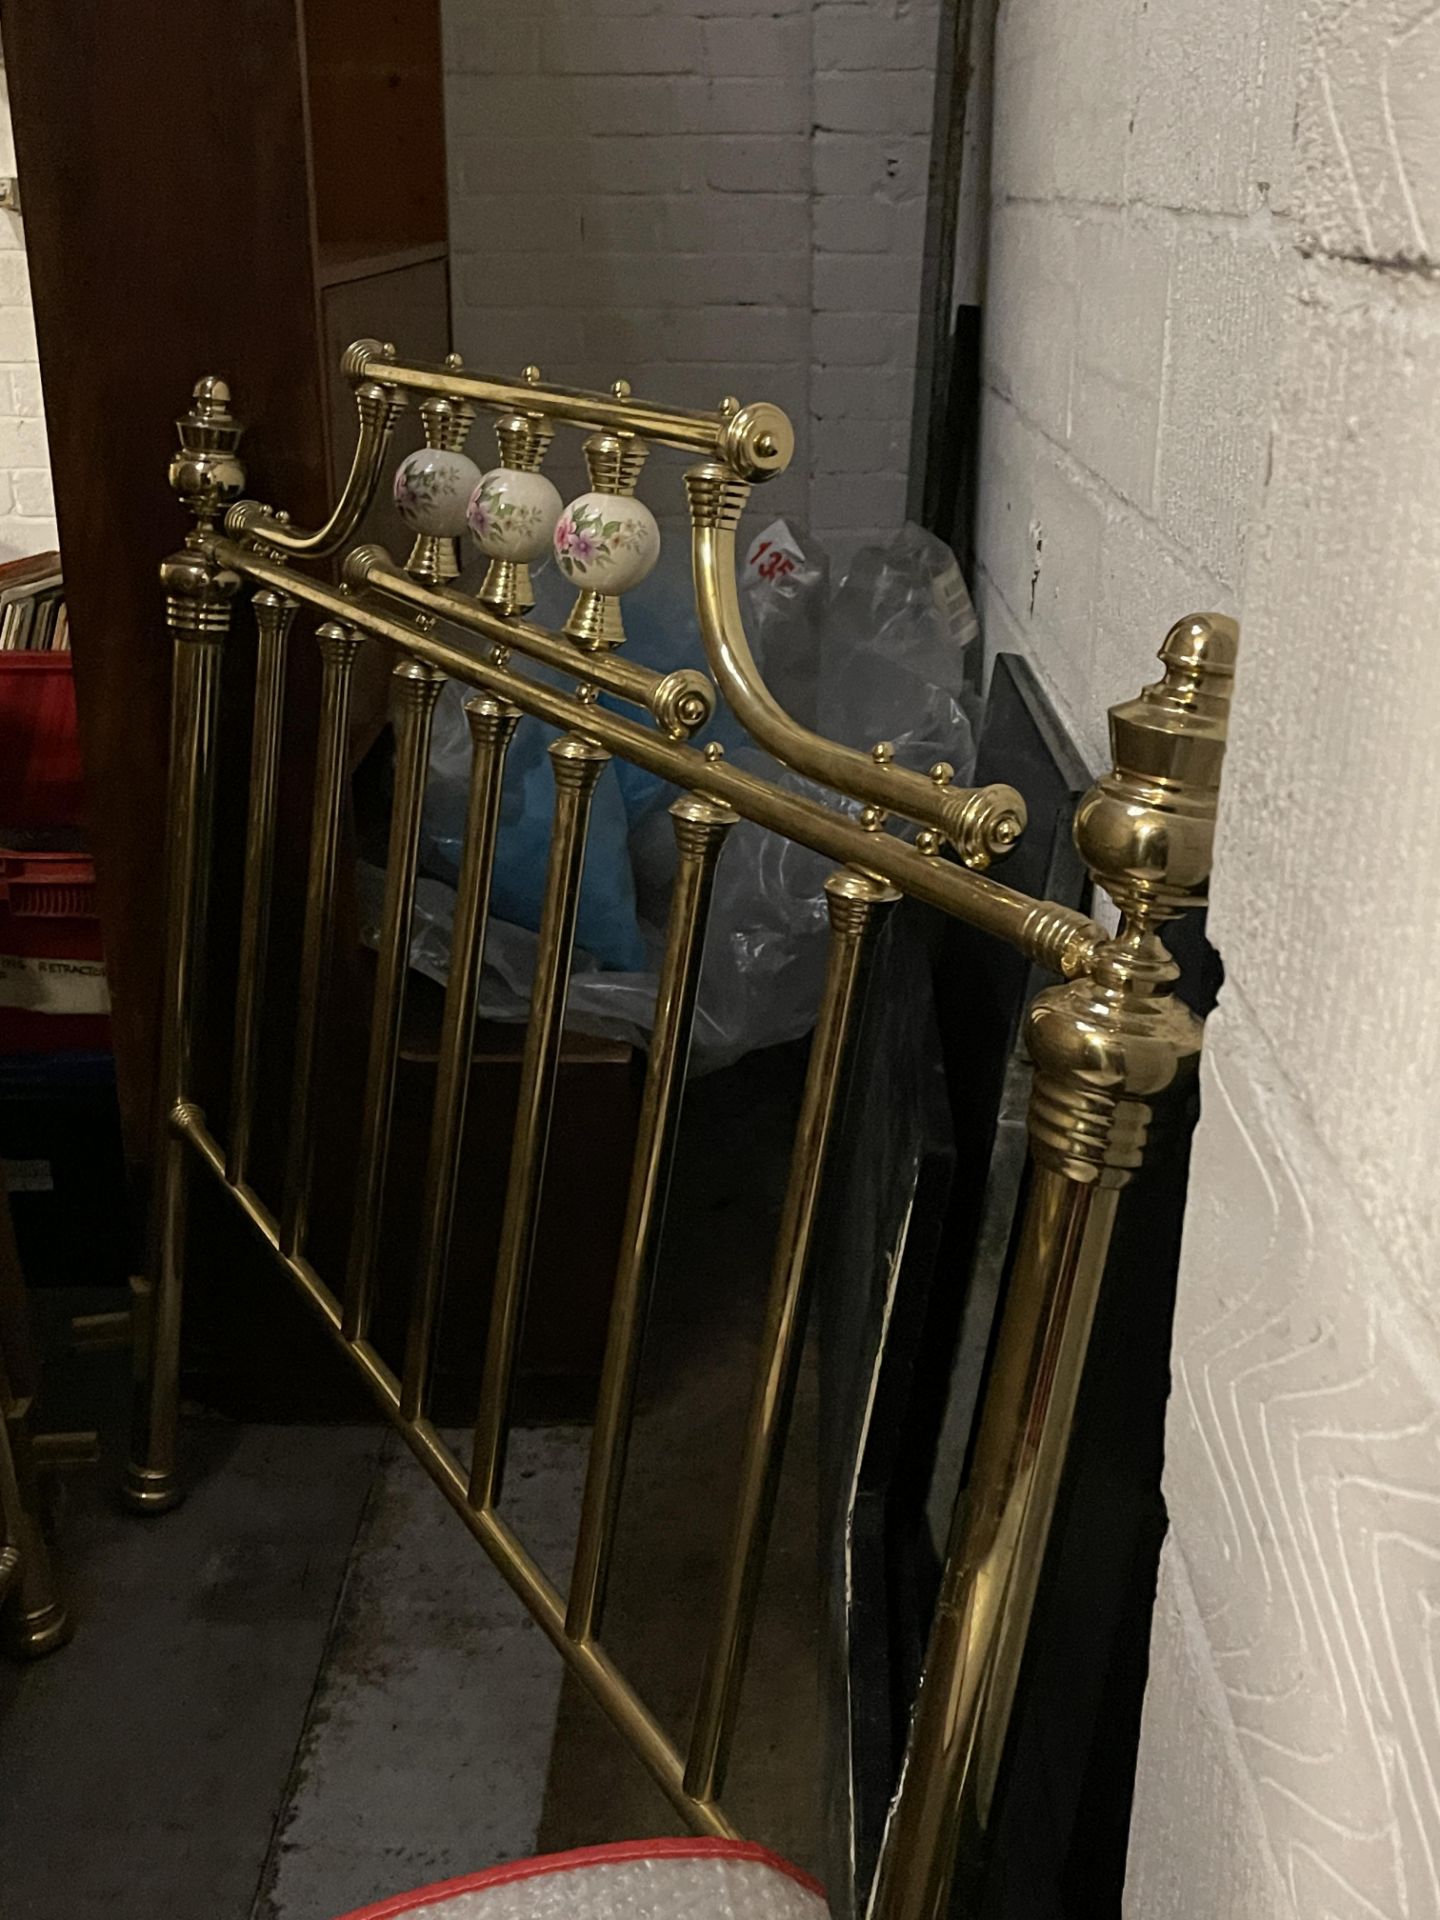 Brass double bed frame very old unclaimed property - Image 2 of 8